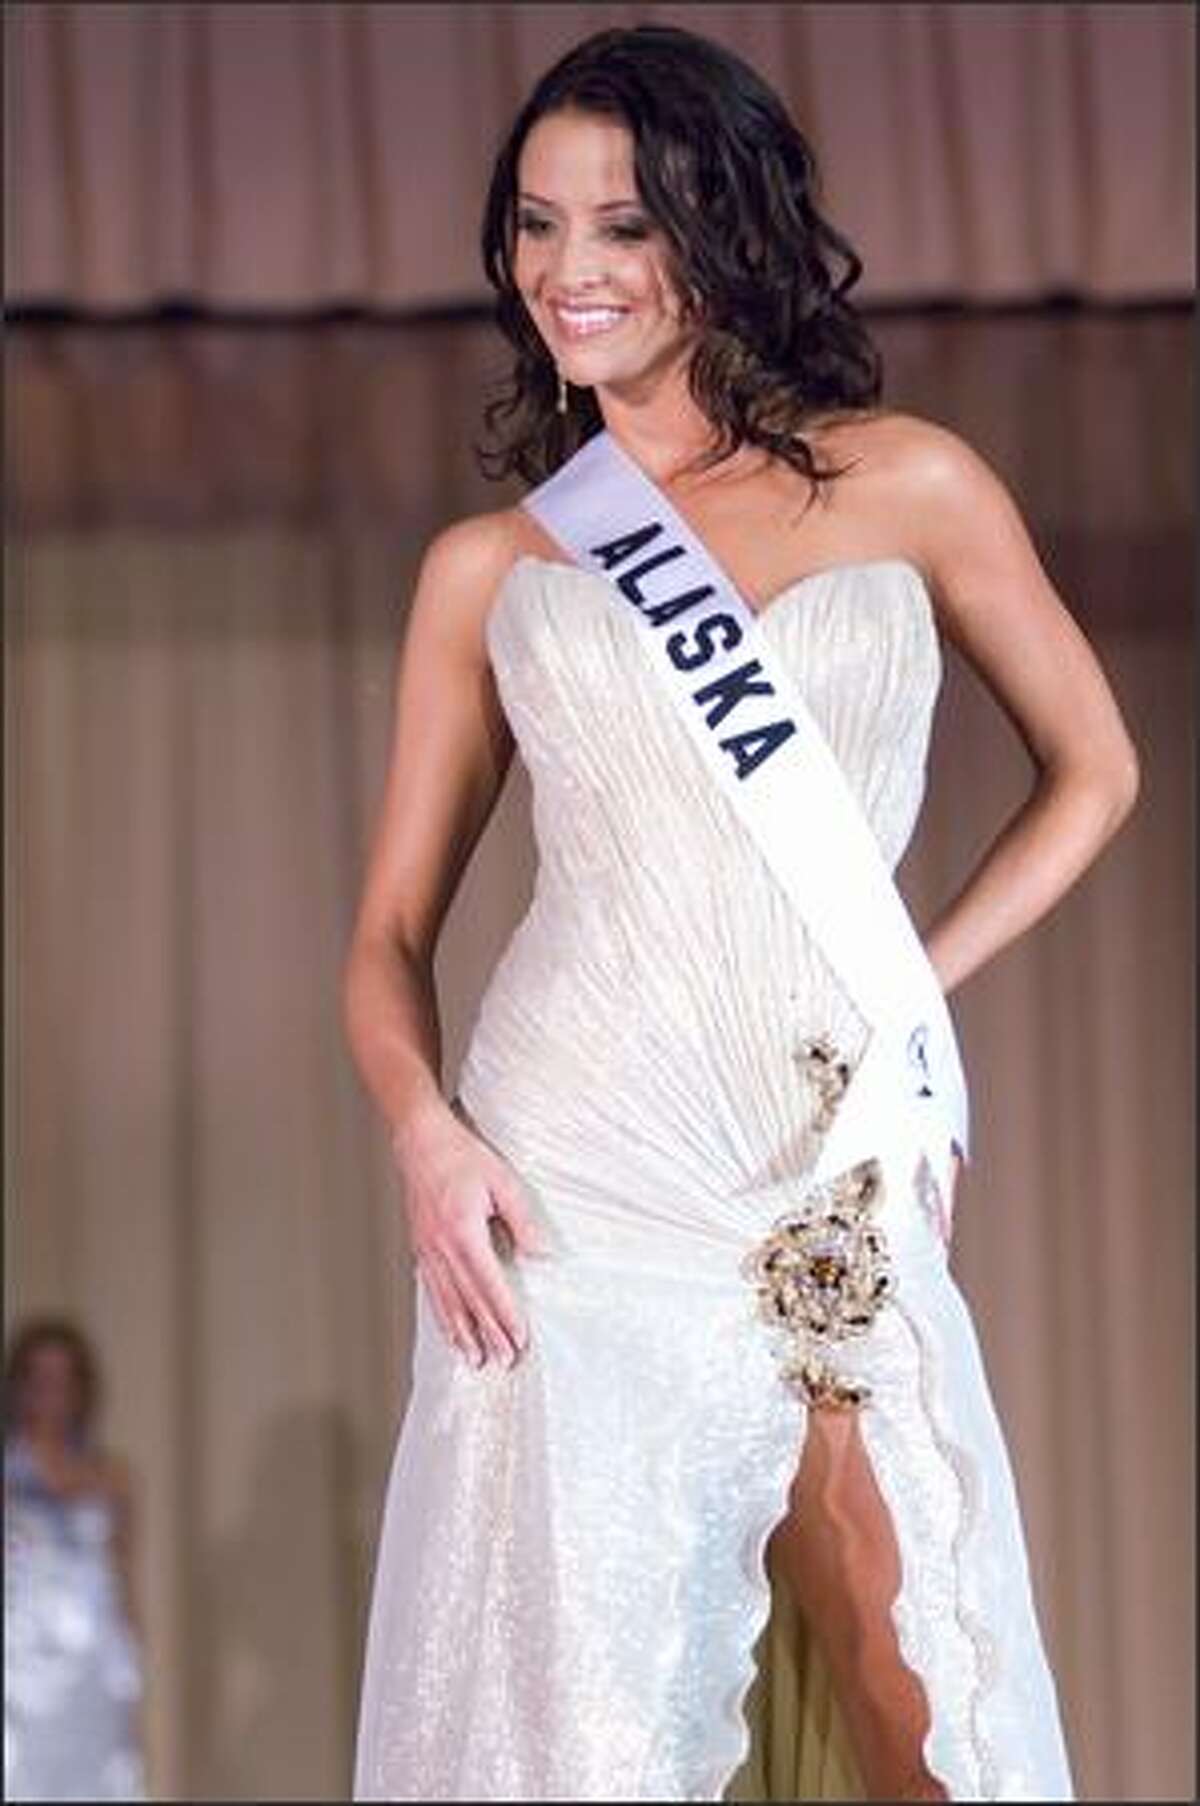 Blair Chenoweth, Miss Alaska USA 2007, competes in an evening gown of her choice during the Miss USA 2007 Preliminary Event at the Wilshire Grand Hotel in Los Angeles on March 19. Each contestant was judged by a panel of judges in individual interview, swimsuit and evening gown categories. The scores will be tallied and the top 15 contestants will be announced during the NBC telecast on March 23.